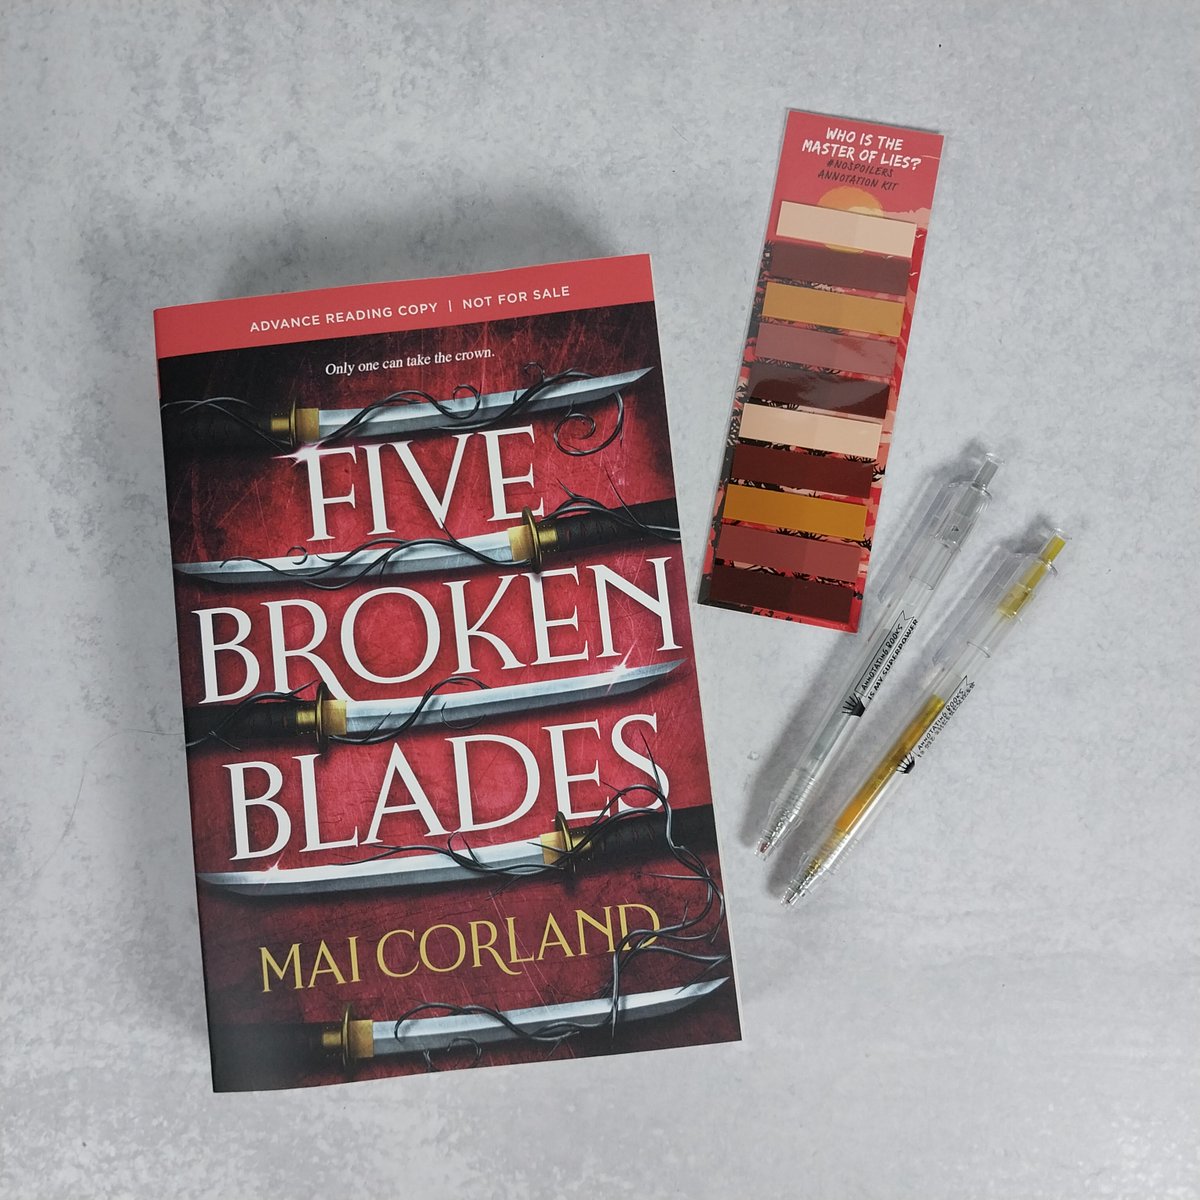 Betrayal, deception, and a twist that will leave you speechless. Five Broken Blades by Mai Corland  amzn.to/3JGYFKV #affiliatelink #gifted #arc  @redtowerbooks  @entangledpub